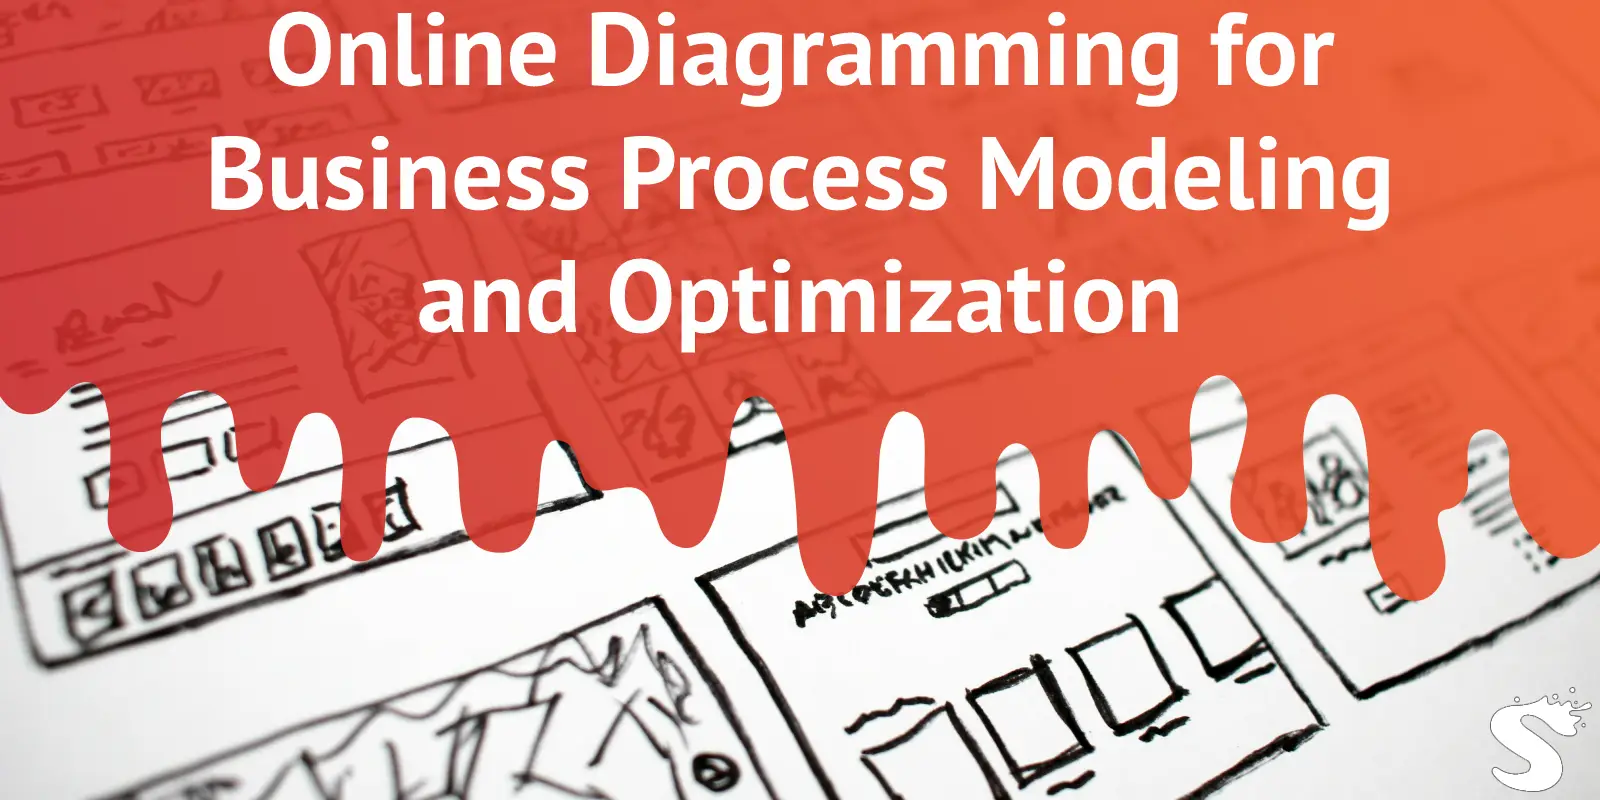 Online Diagramming for Business Process Modeling and Optimization